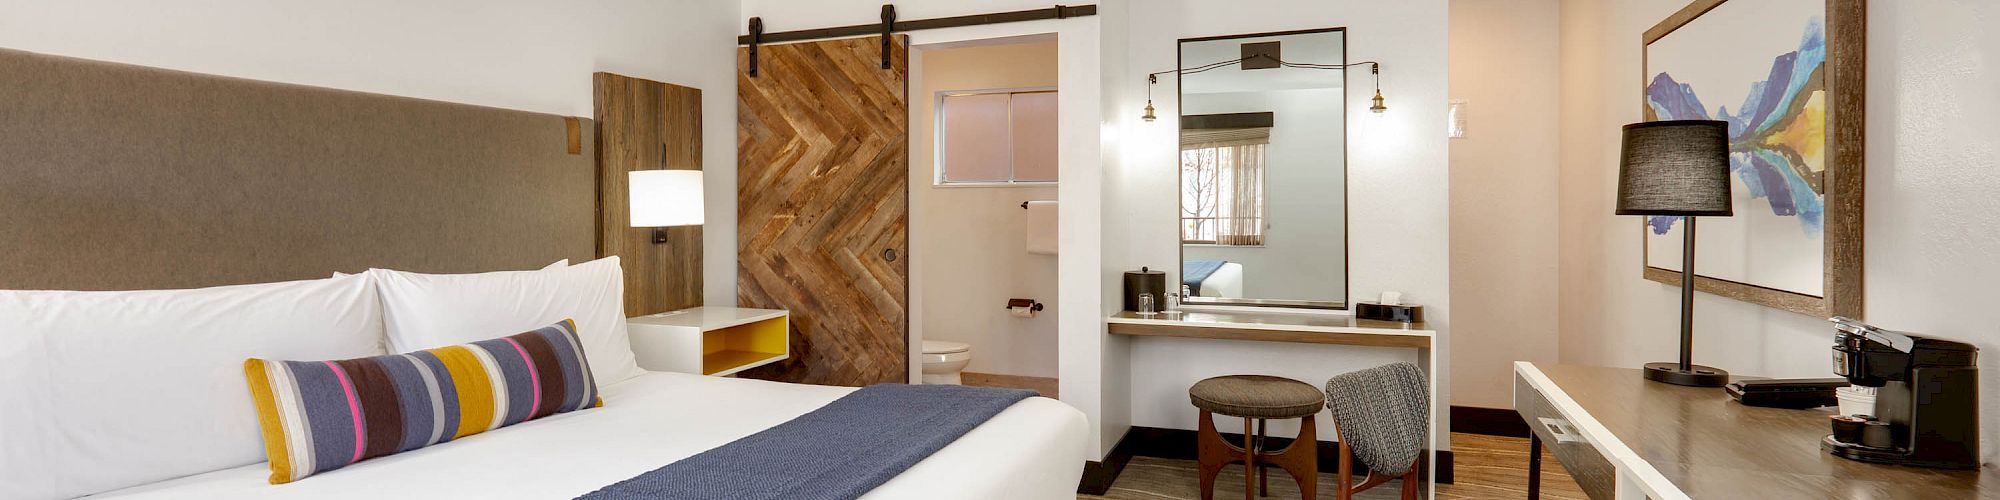 A modern hotel room with a large bed, blue throw, work desk, chair, vanity area, and bathroom with sliding barn door and contemporary decor.